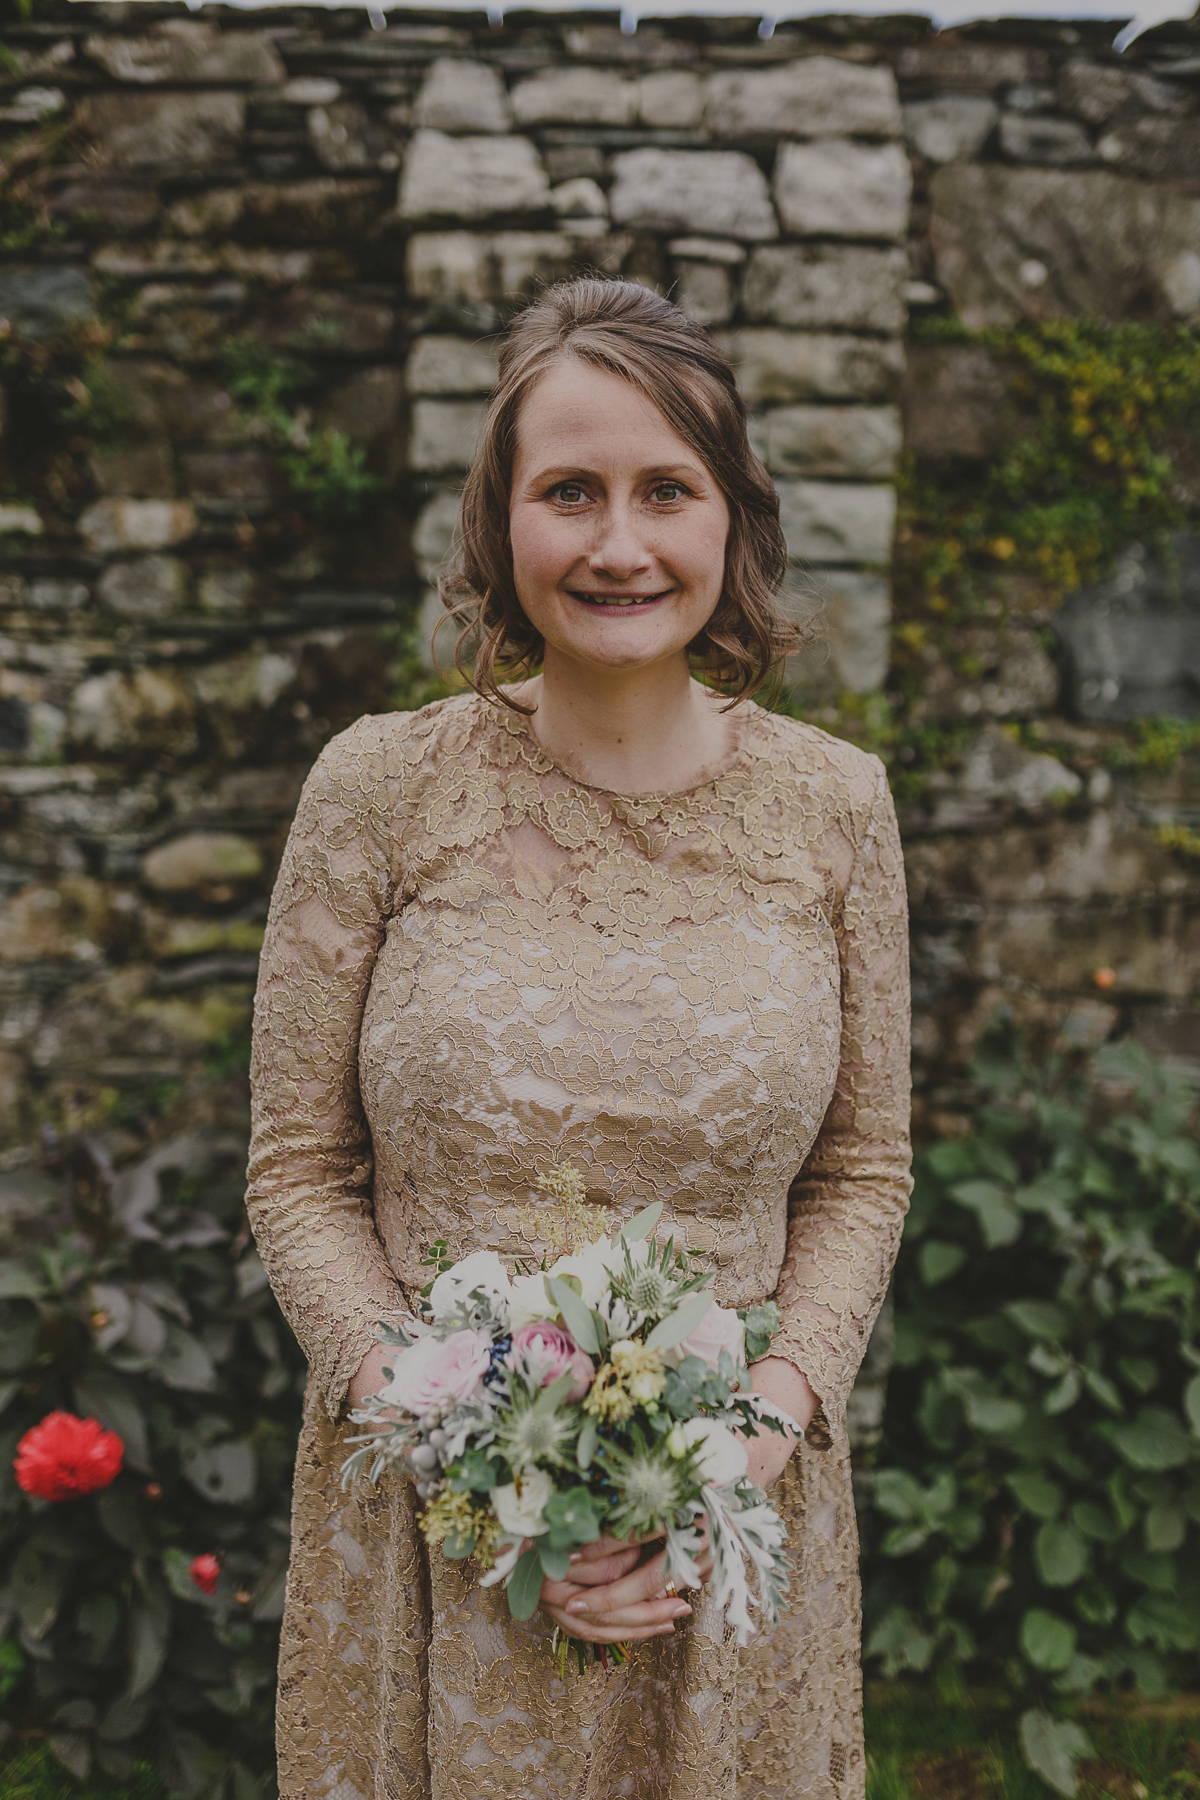 Bride Lucy wore the 'Peony' gown by Naomi Neoh for her romantic and elegant gin inspired wedding in the Lake District. Photography by Lottie Elizabeth.